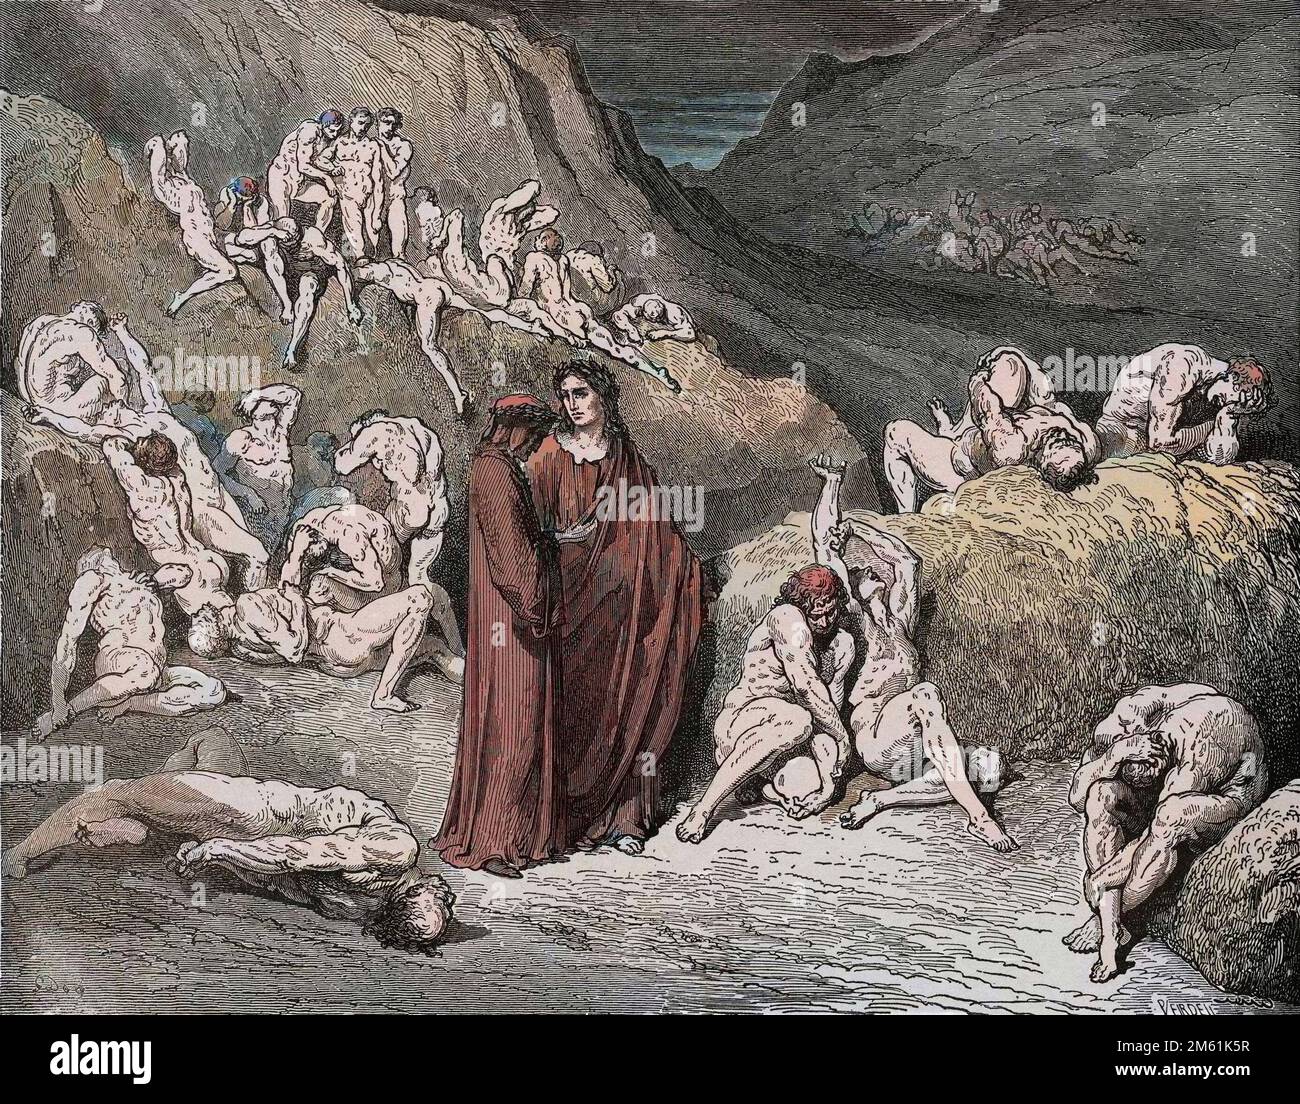 Inferno, Canto 29 : The falsifiers and forgers tormented with itching,  illustration from The Divine Comedy by Dante Alighieri, 1885 (digitally  coloured engraving)